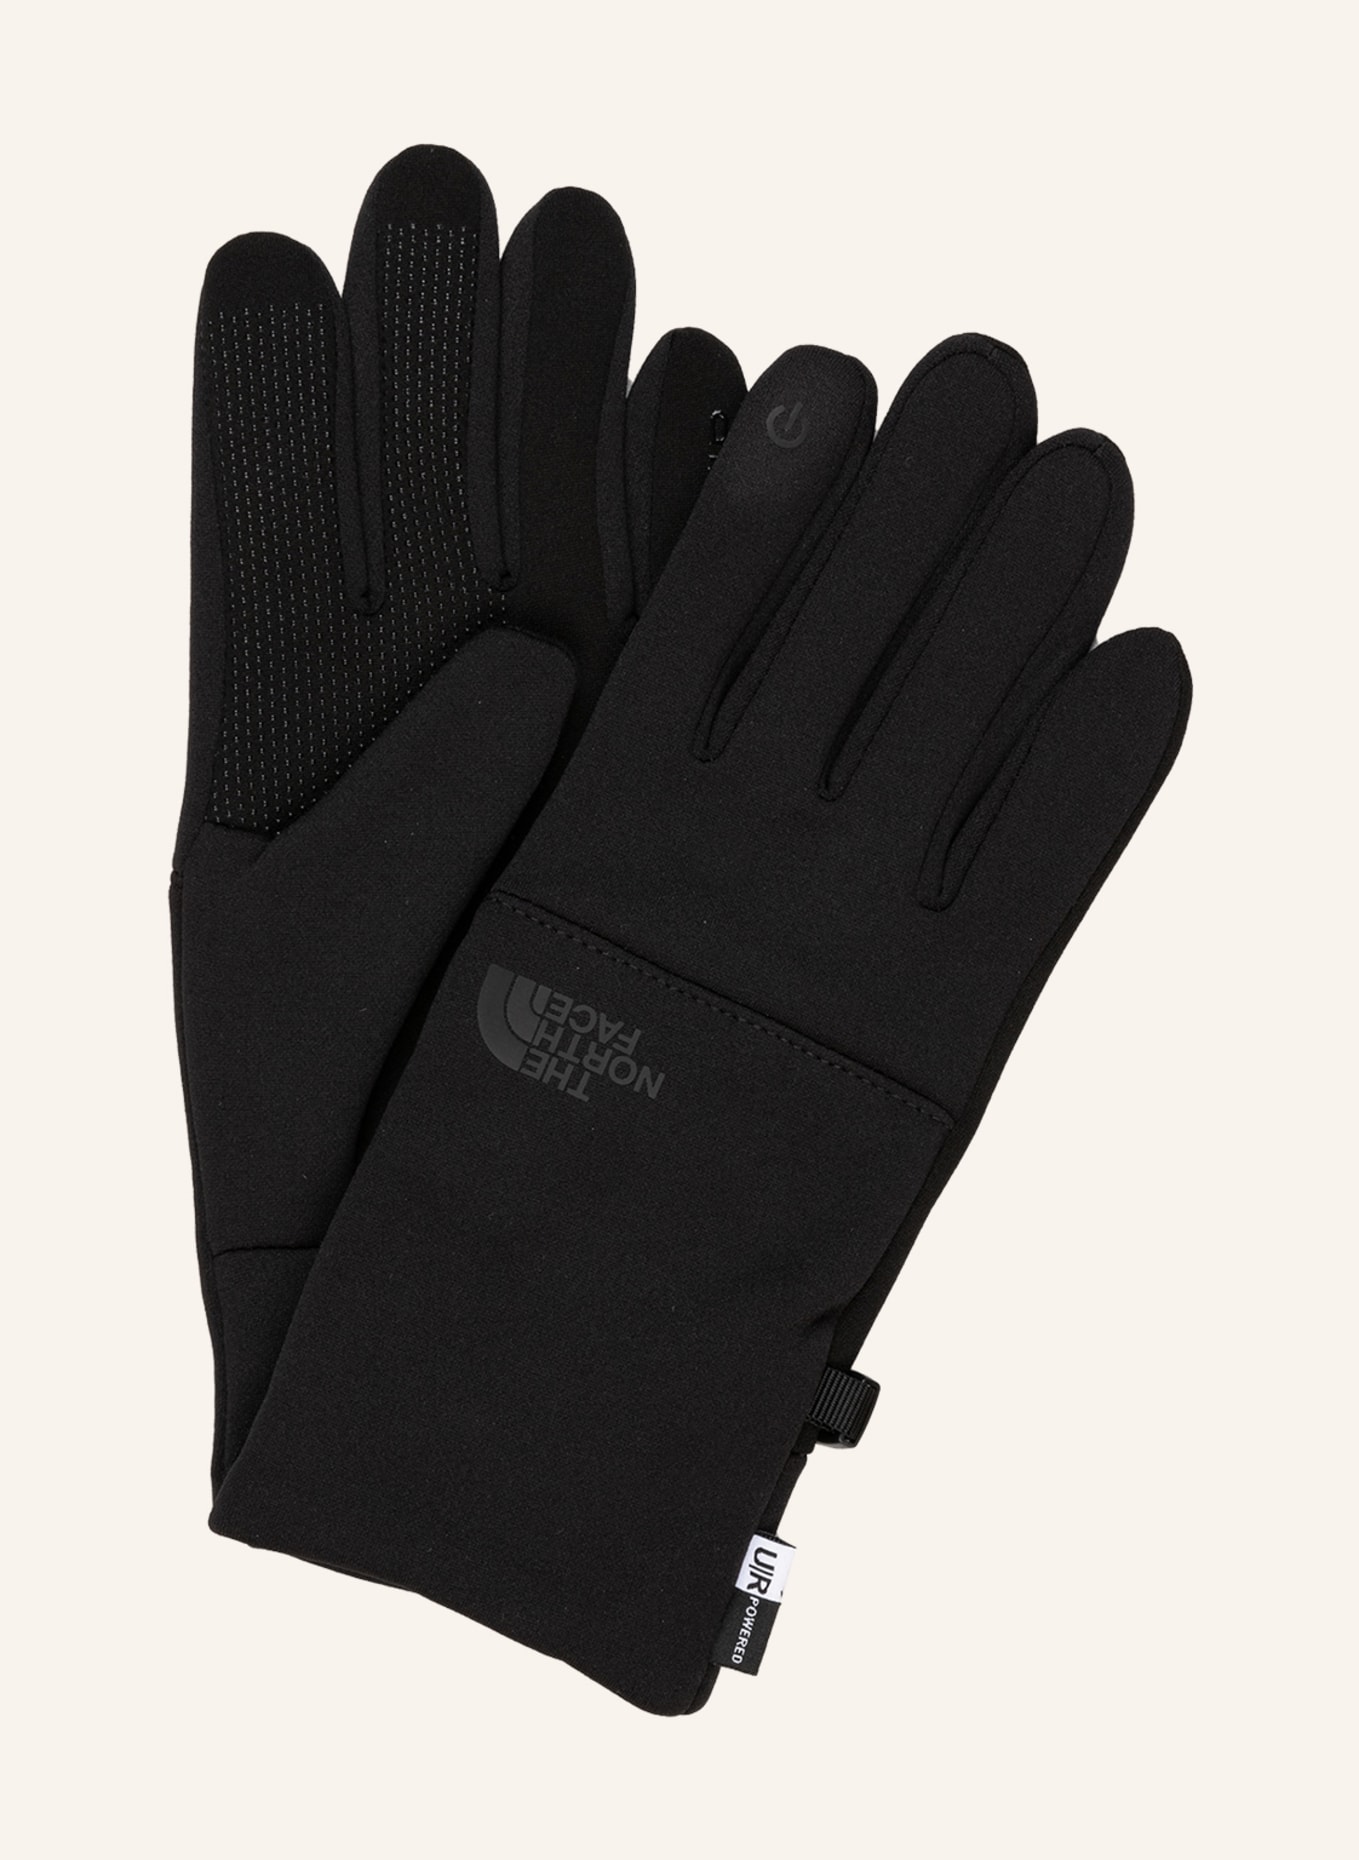 THE NORTH FACE Multisport gloves black function touchscreen ETIP with in